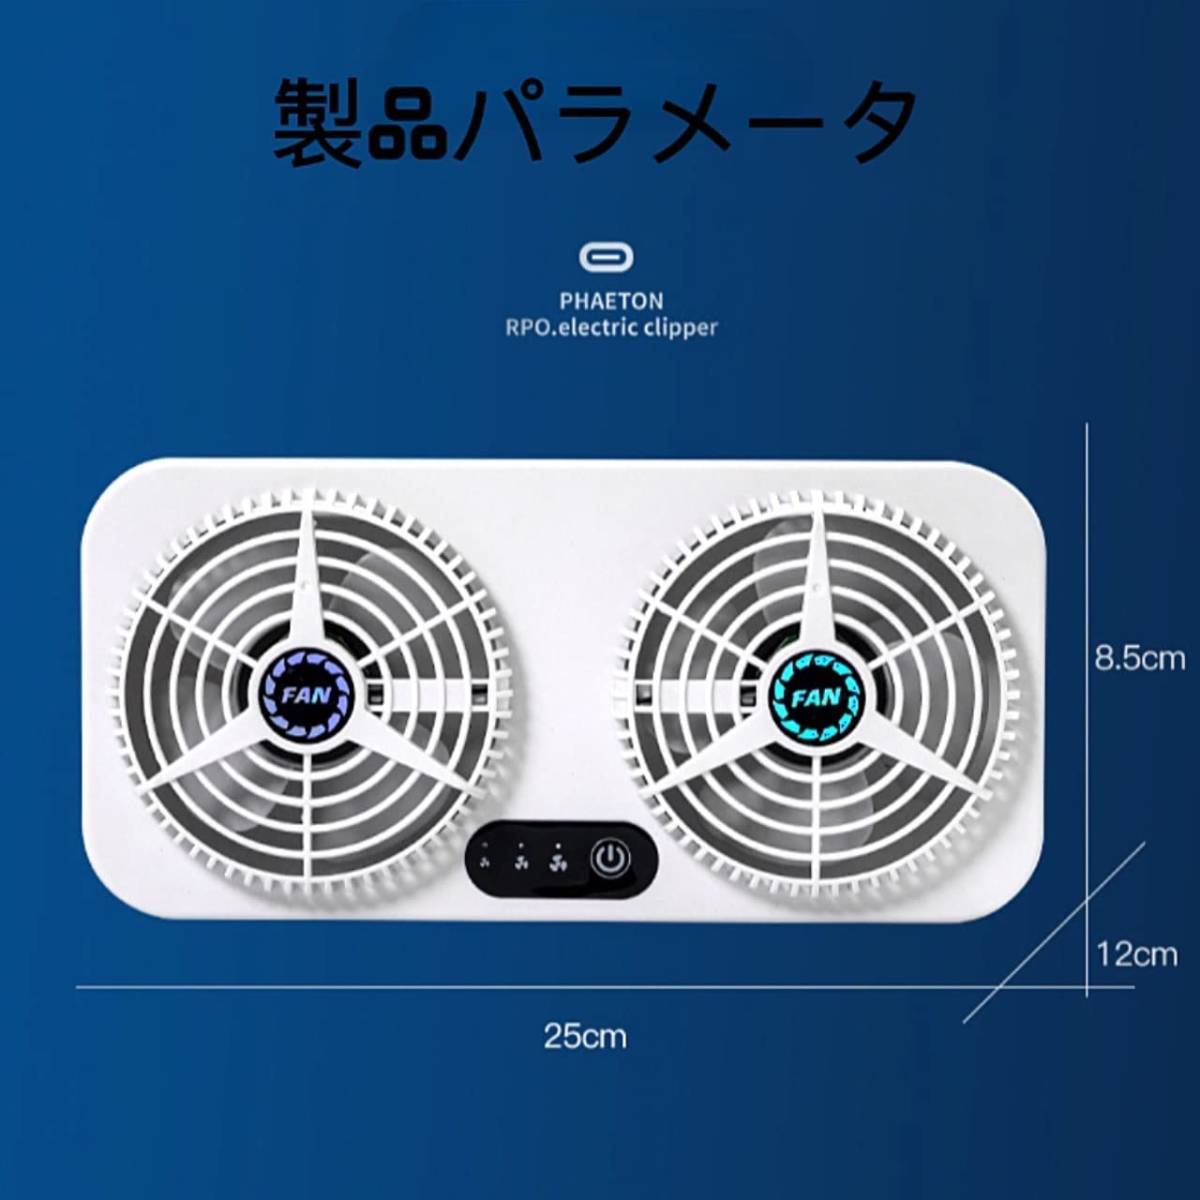  in-vehicle electric fan two fan air conditioner hot . exhaust fan air cleaning cooling smoking clean cooler,air conditioner three -step car summer place ... through manner Drive white sleeping area in the vehicle 